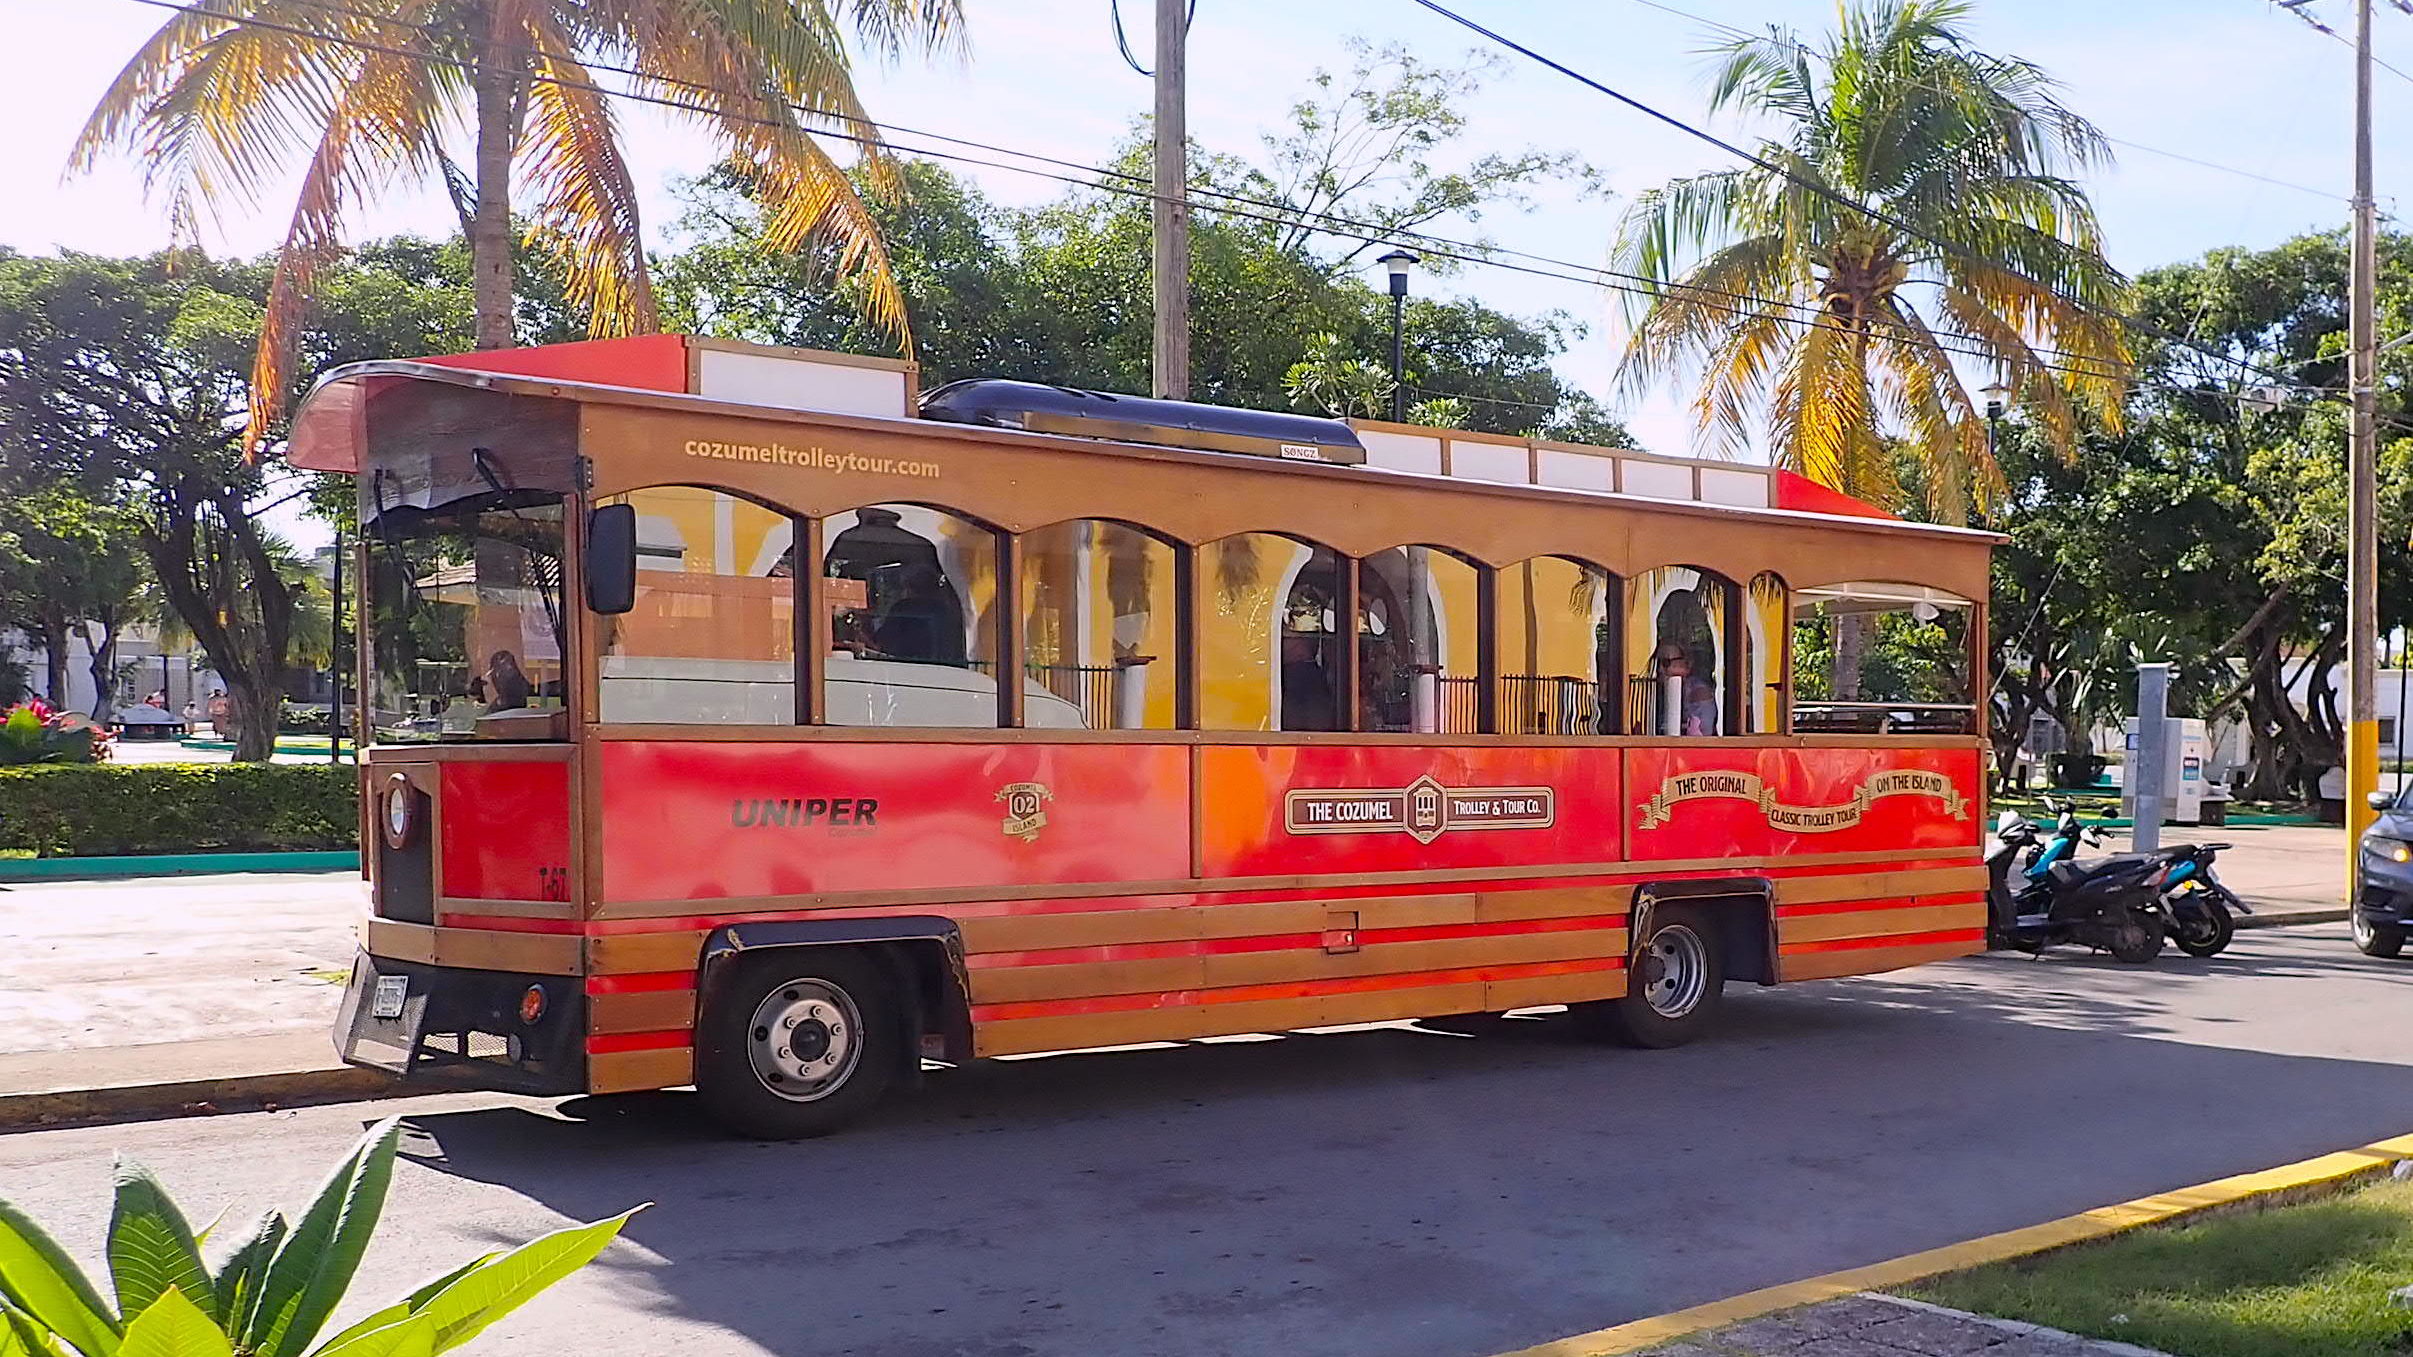 Cozumel red trolley tour vehicle riding past the Corpus Christi church.